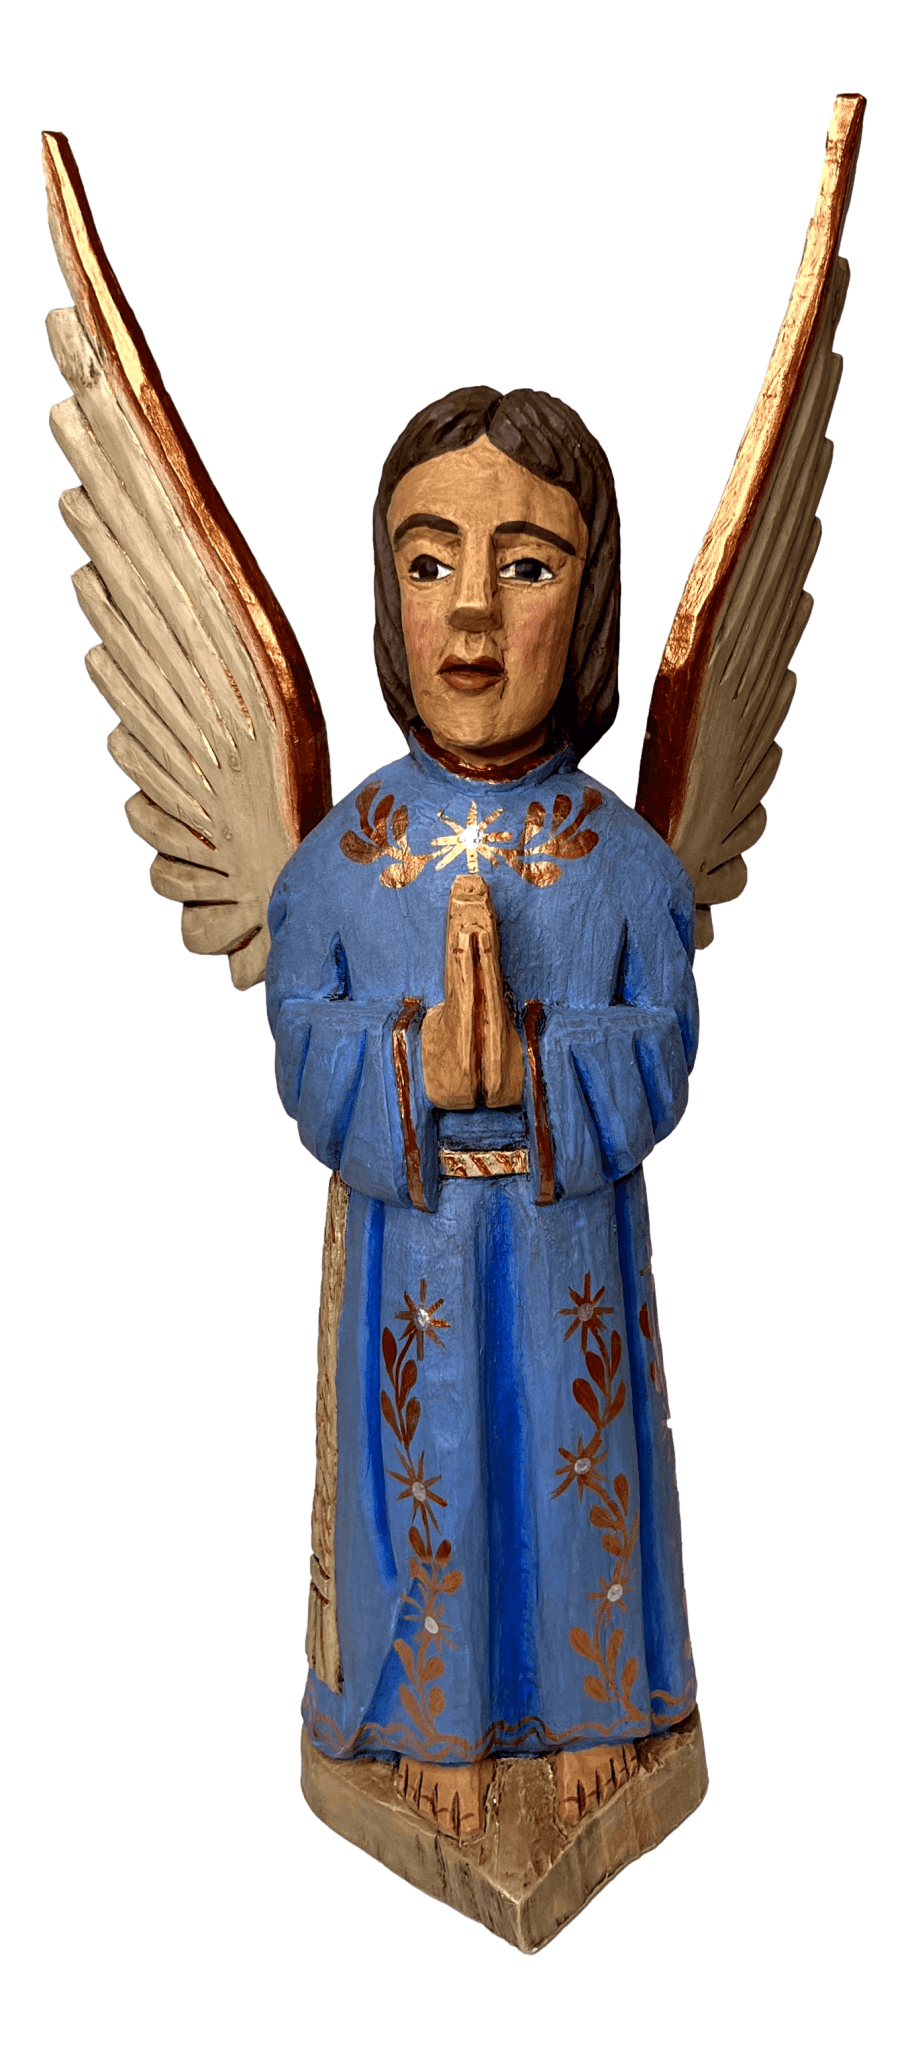 Angel Wood Statue Detachable Wings Blue Clothing Large Hand Carved By Mexican Artisans H: 20 inches X W: 8.5inches - Ysleta Mission Gift Shop- VOTED El Paso's Best Gift Shop